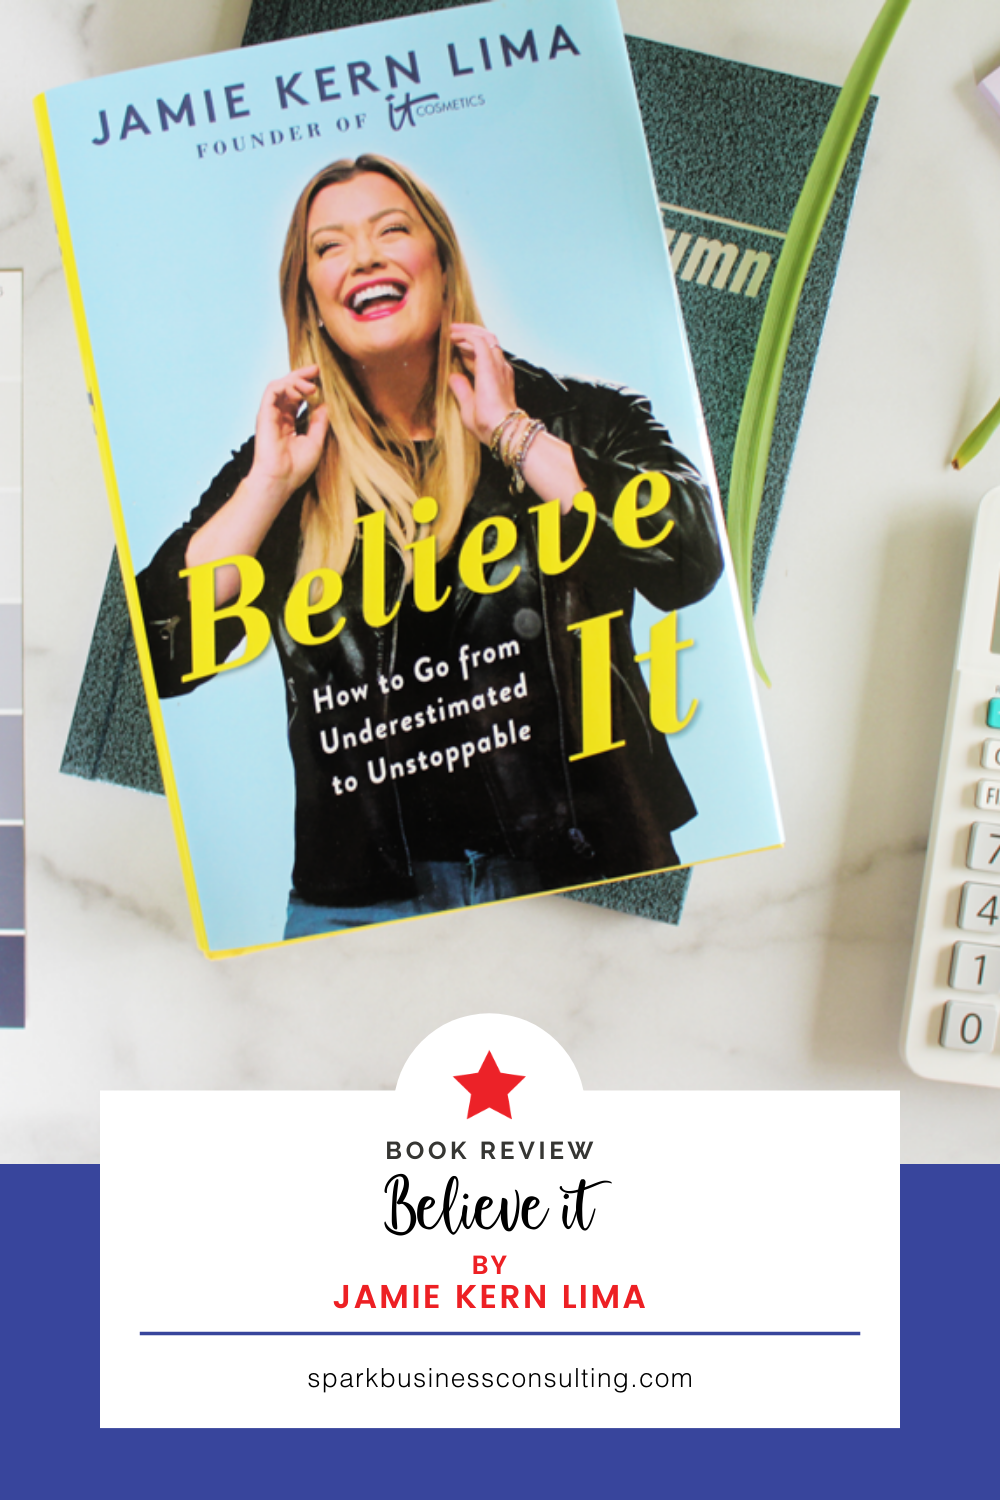 Believe IT: How to Go from Underestimated to Unstoppable See more